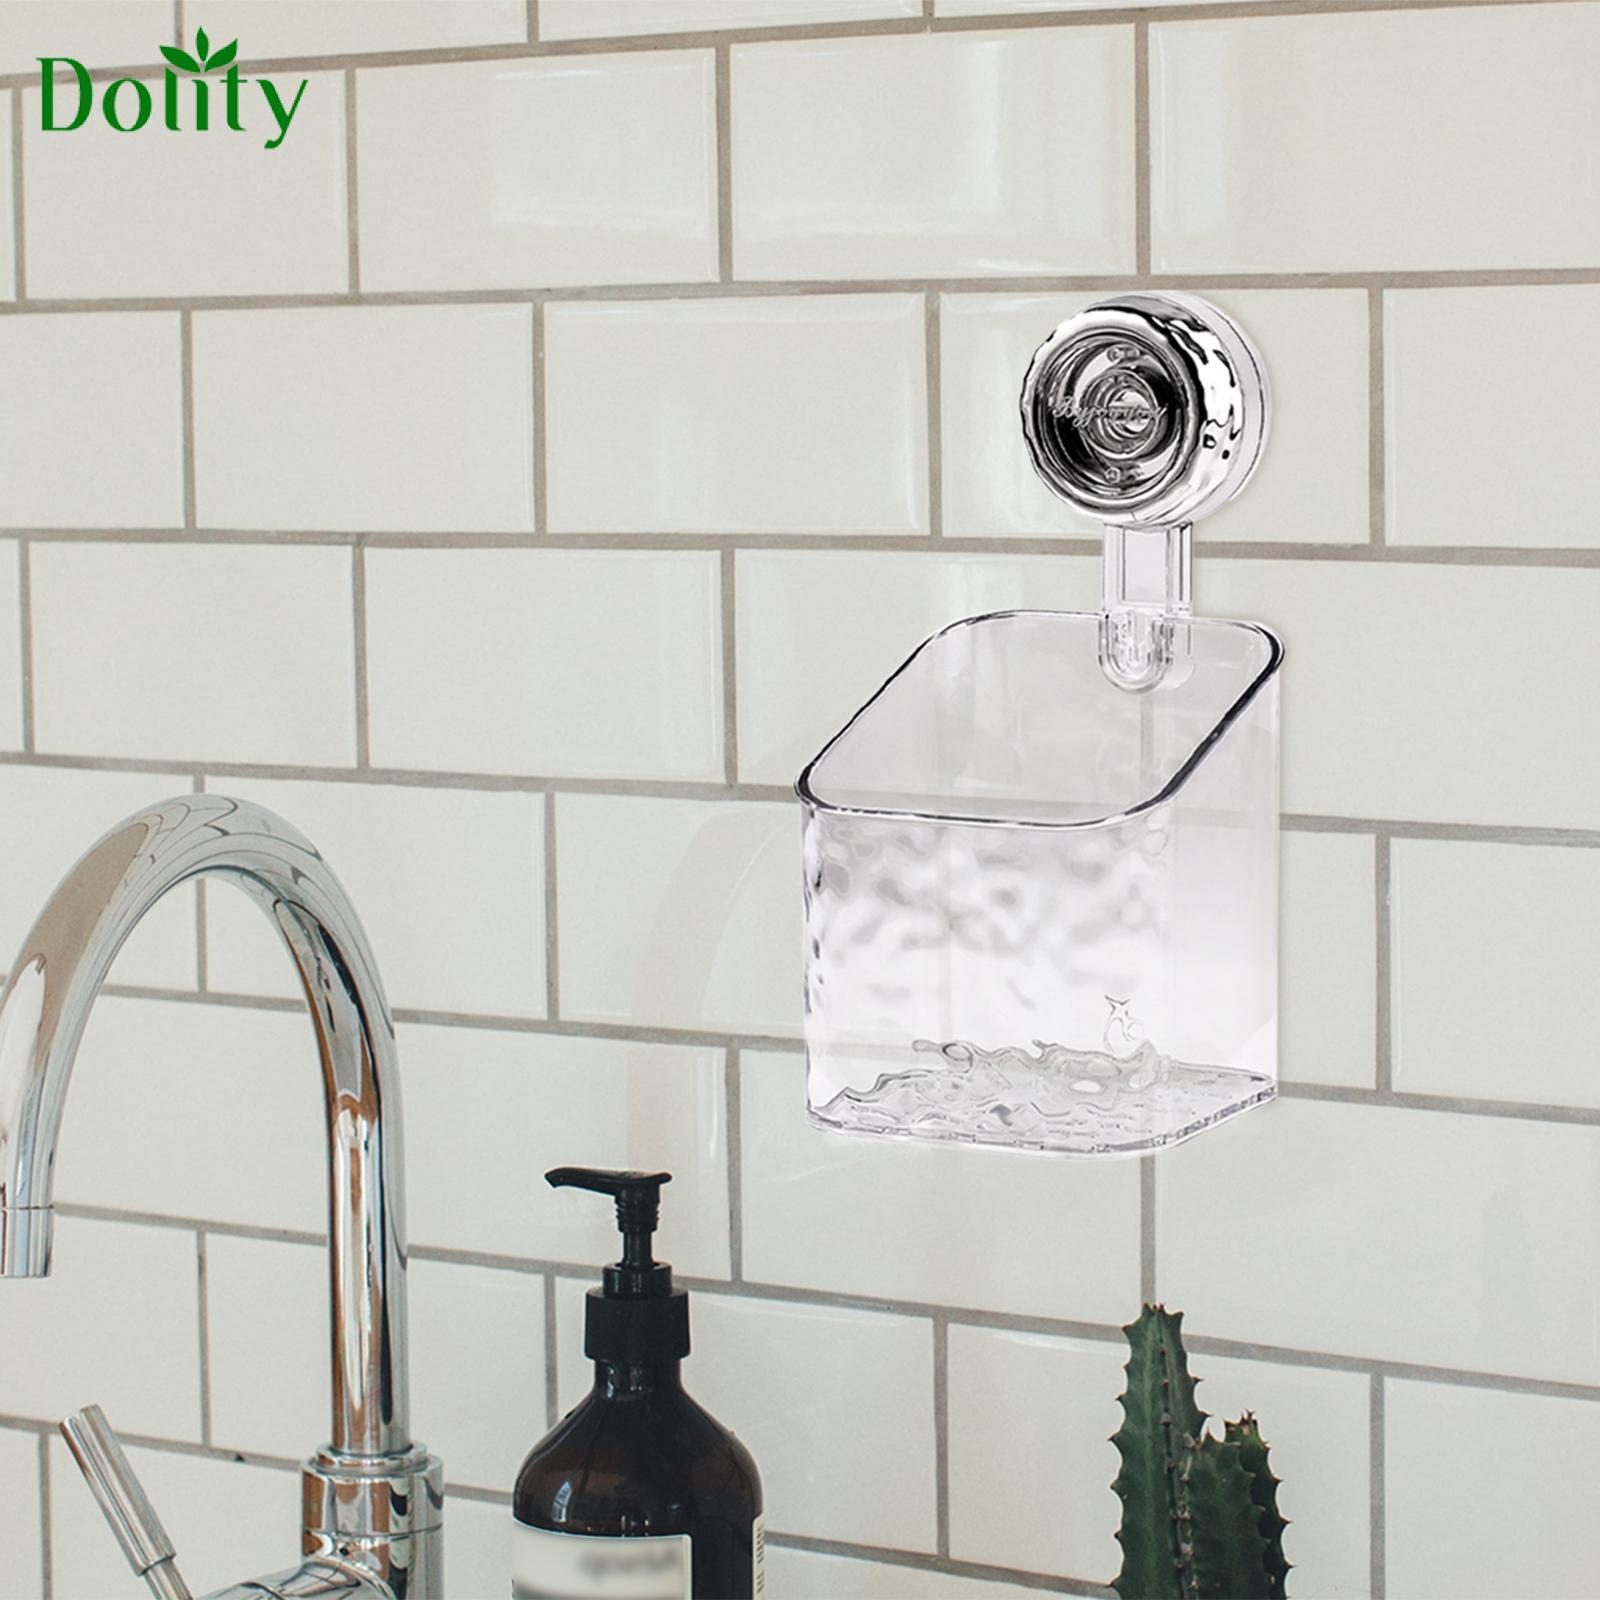 Dolity Shower Caddy Suction Cup Wall Mounted Soap Dish Holder Kitchen